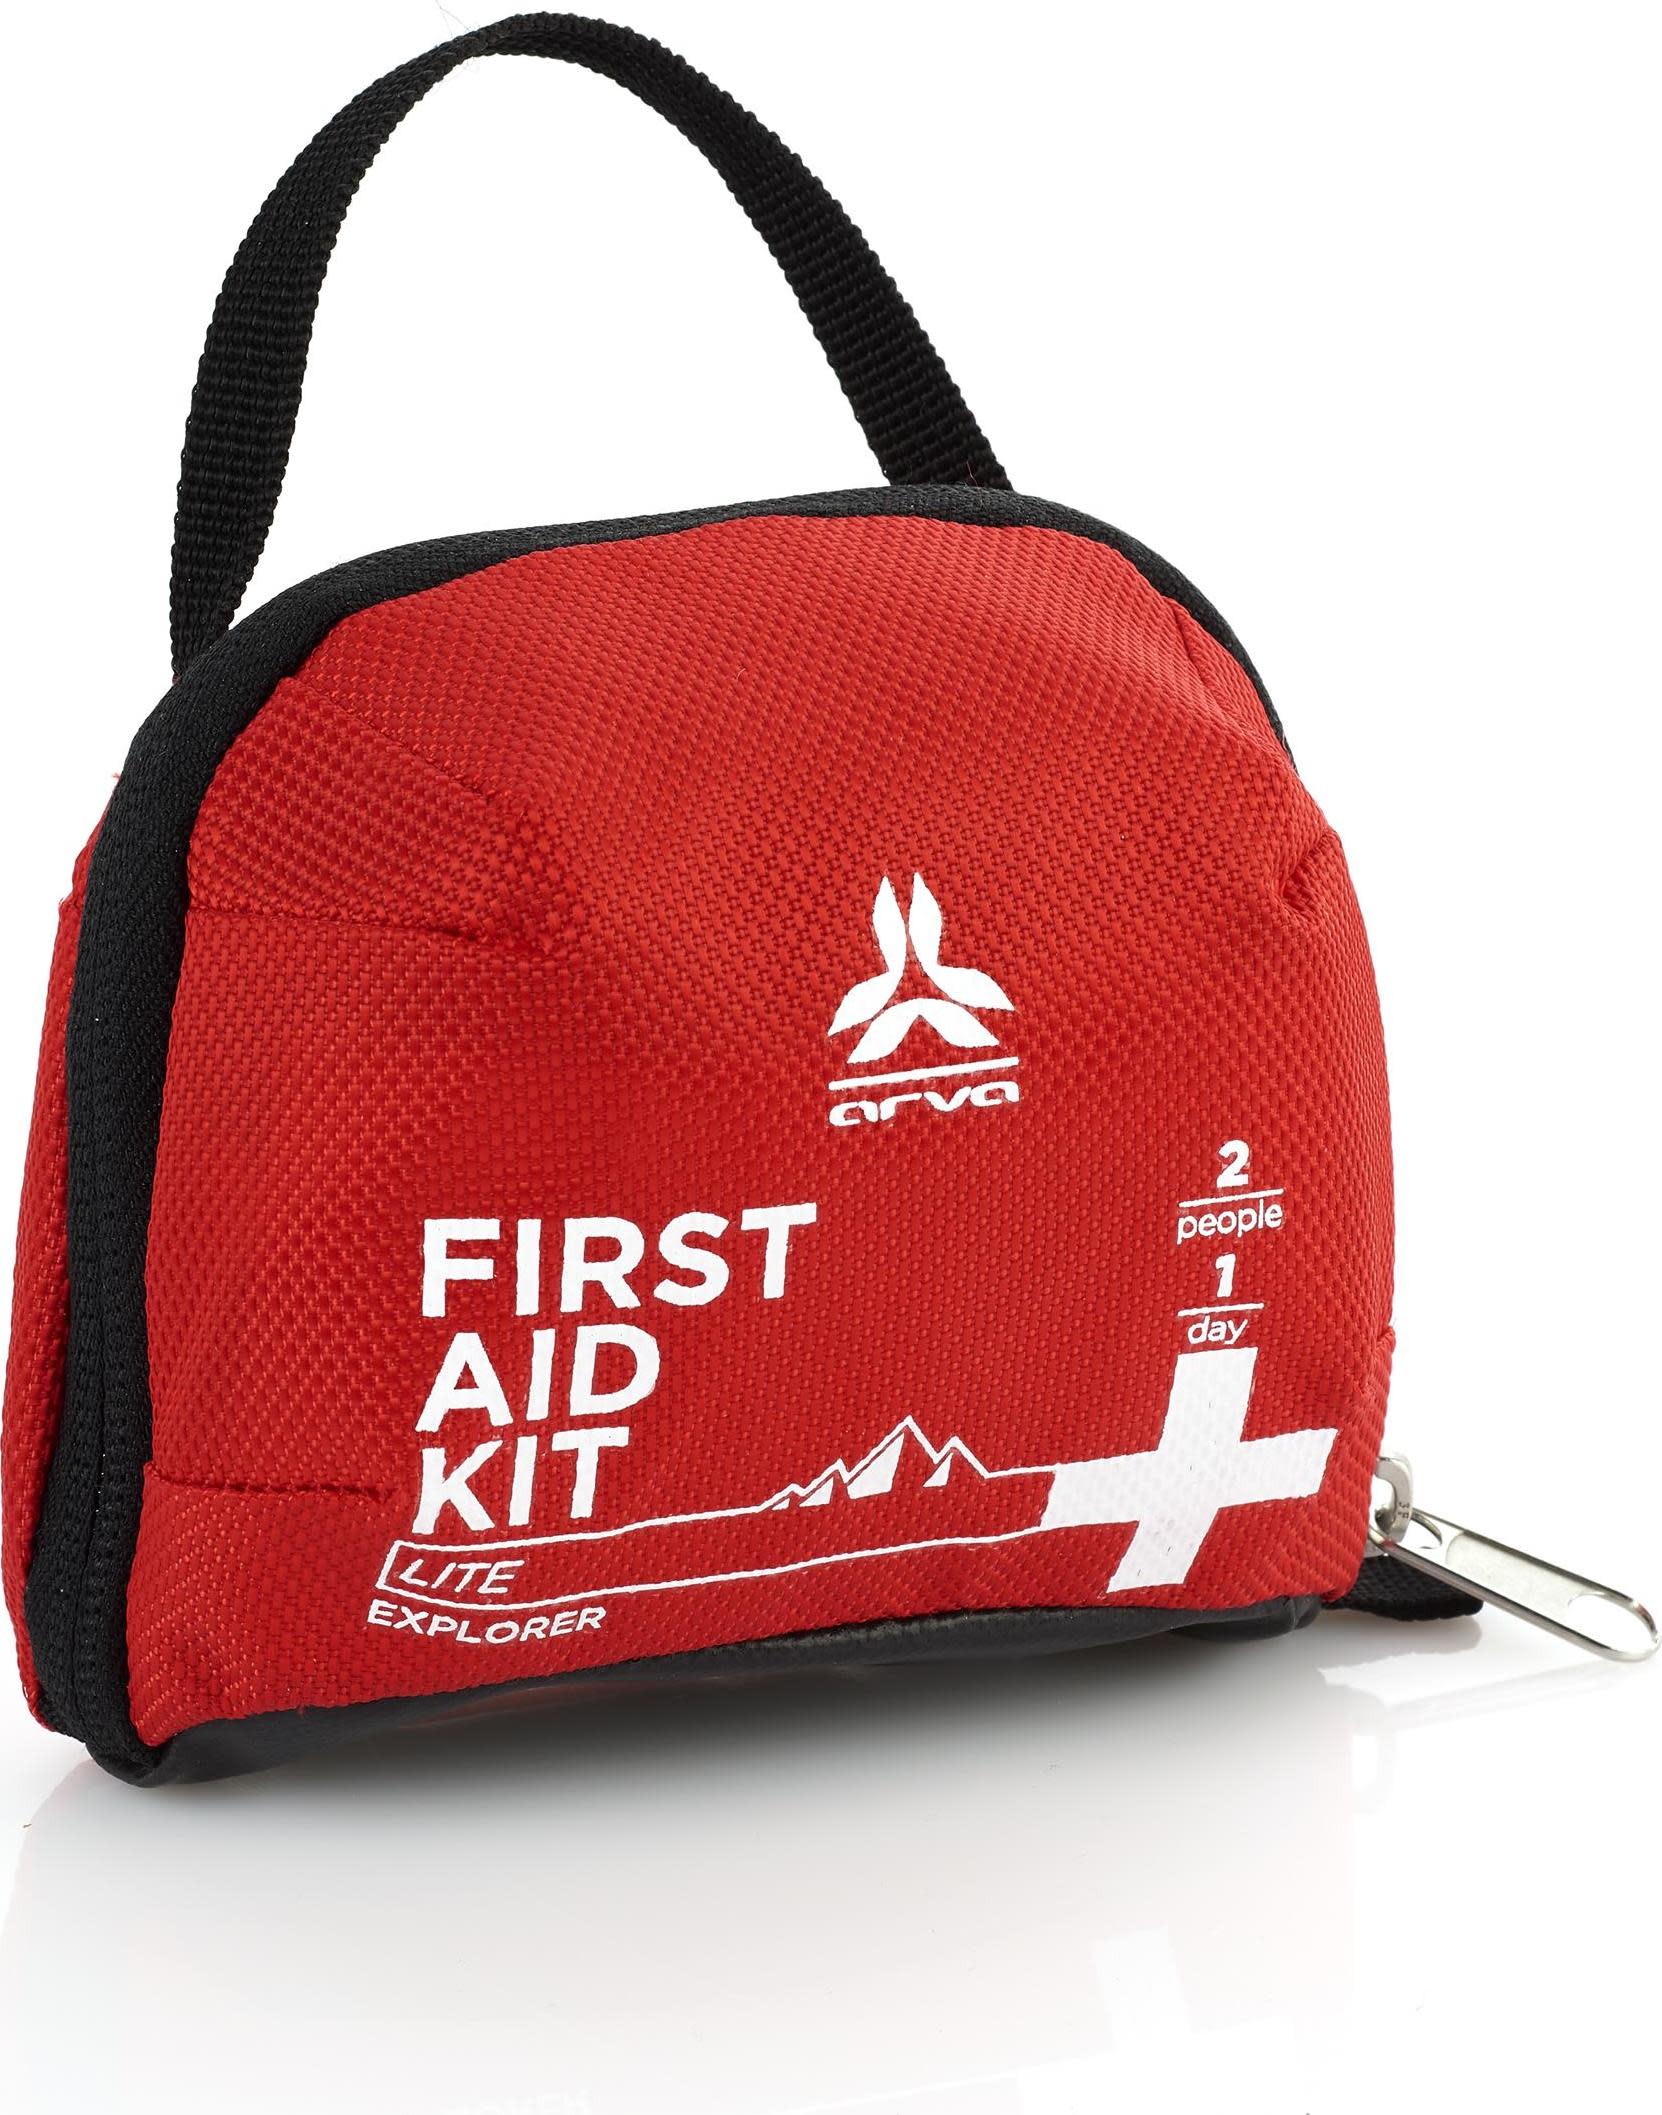 First Aid Kit Lite Explorer Full No color